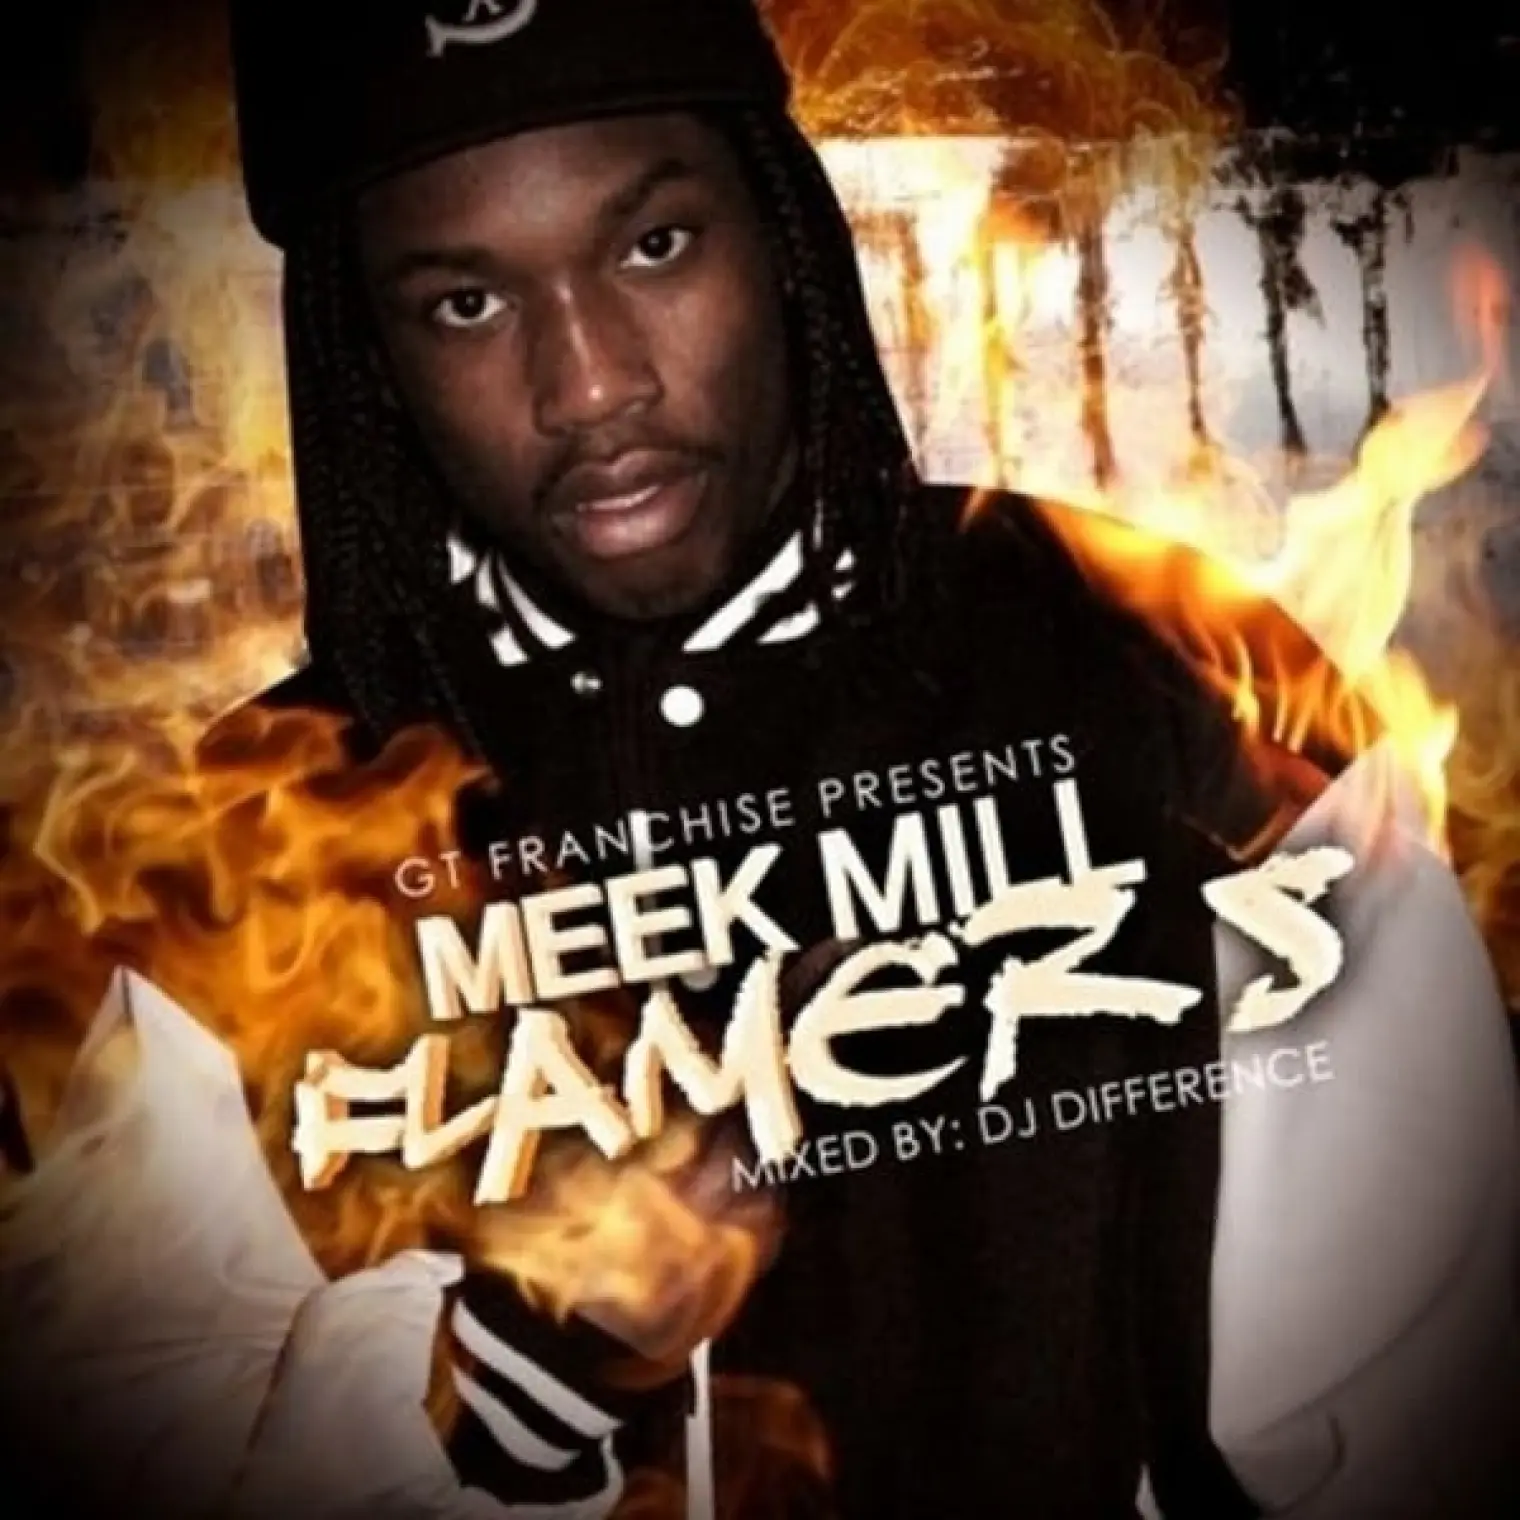 Flamers (Mixed By DJ Difference) -  Meek Mill 